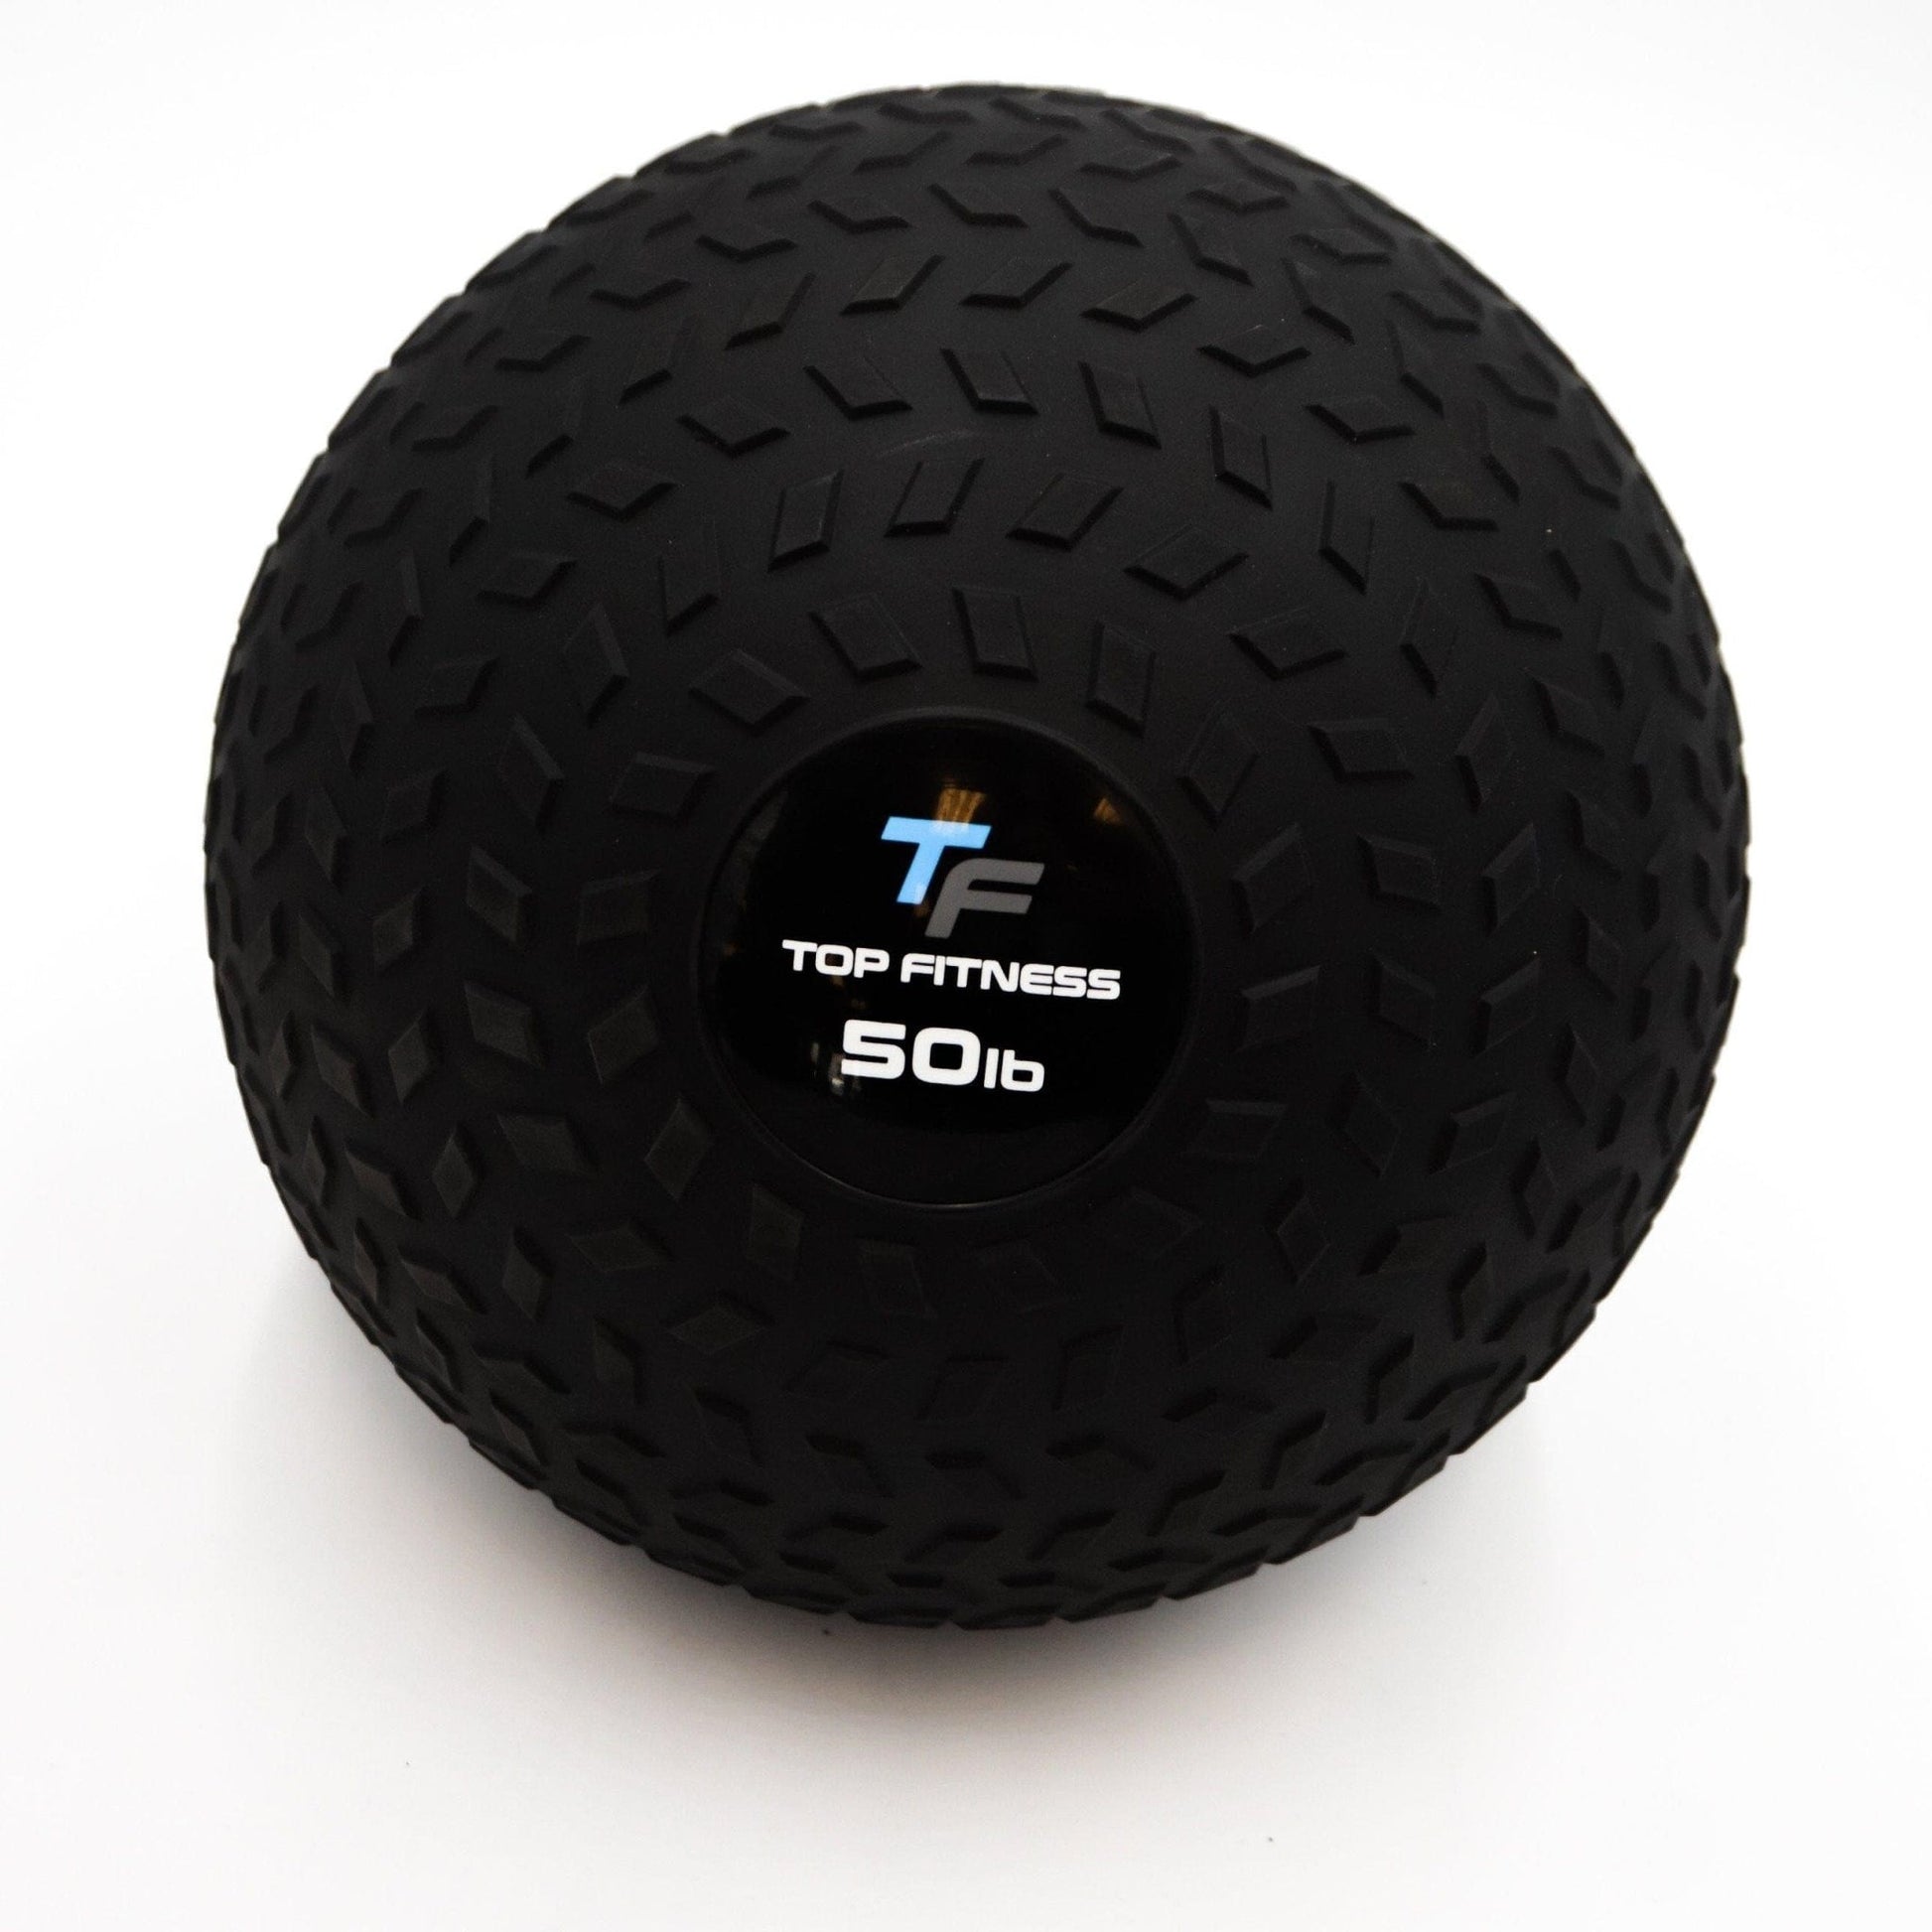 Top Fitness Slam Ball Weighted Resistance Top Fitness 50lb